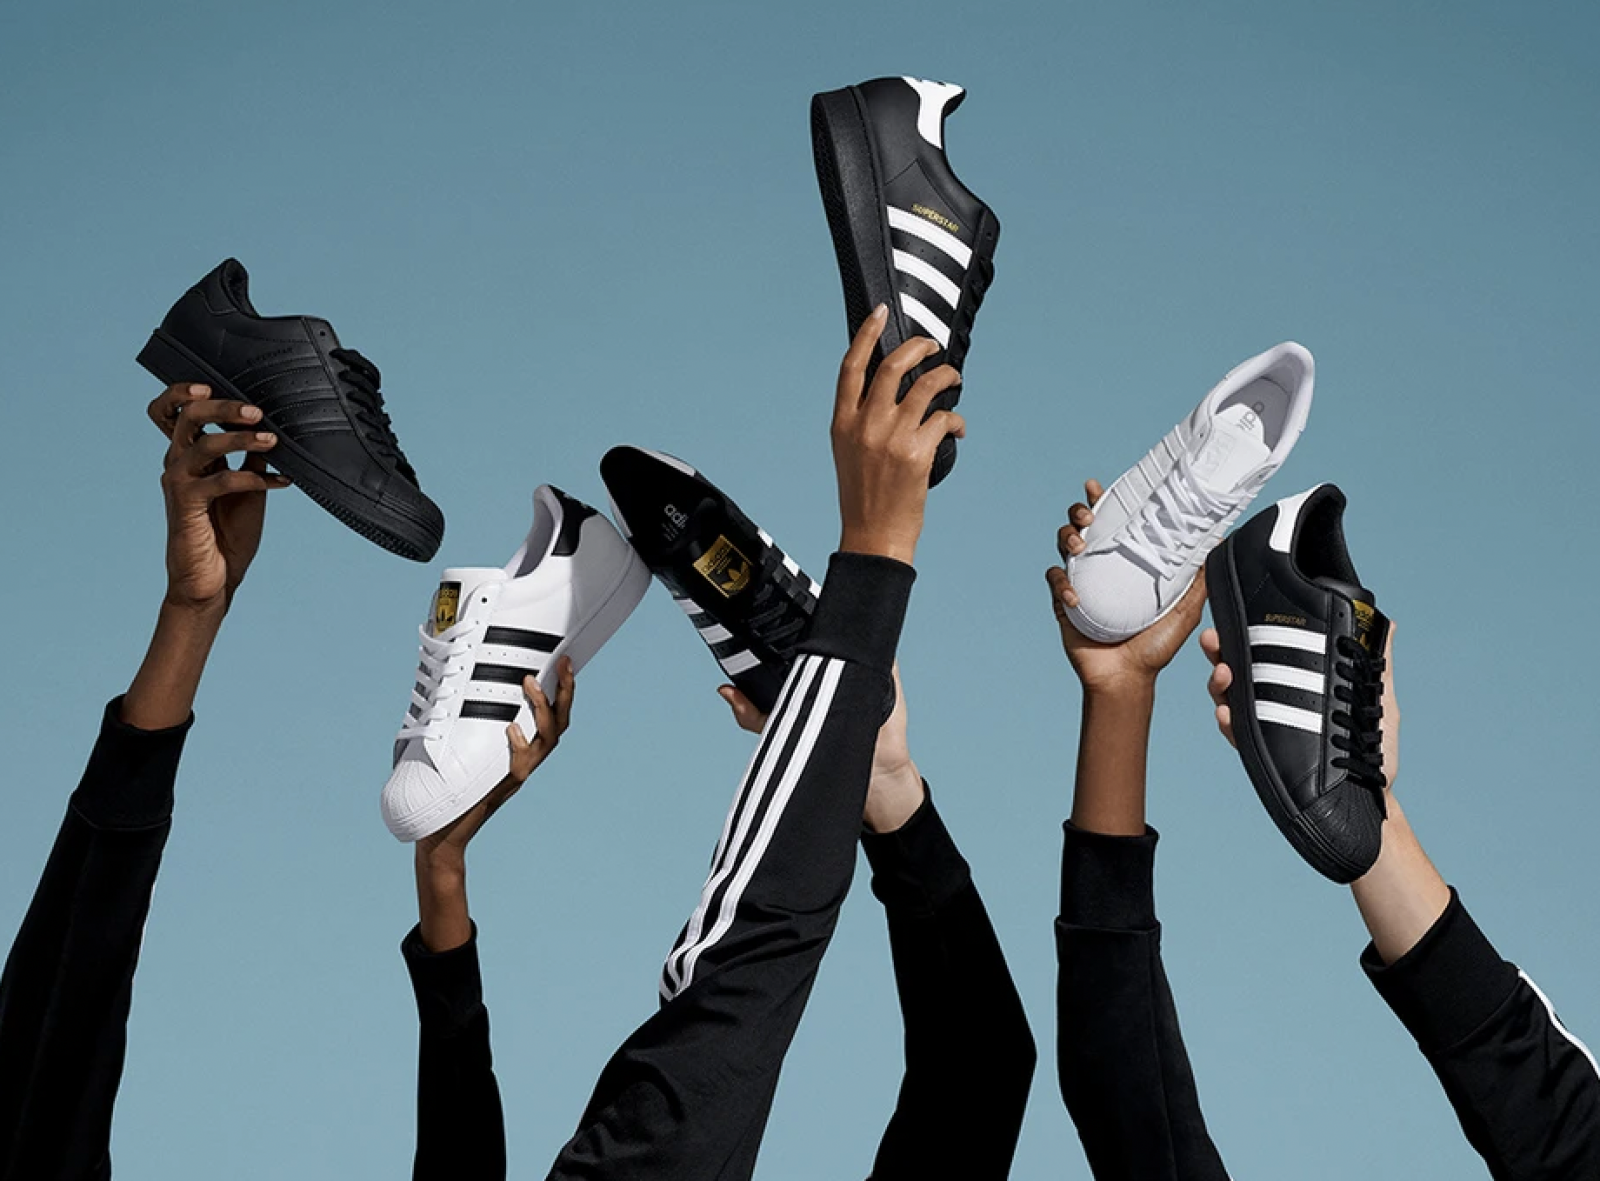 H&M in Almost Fight With Adidas Striped Workout Wear - The Fashion Law